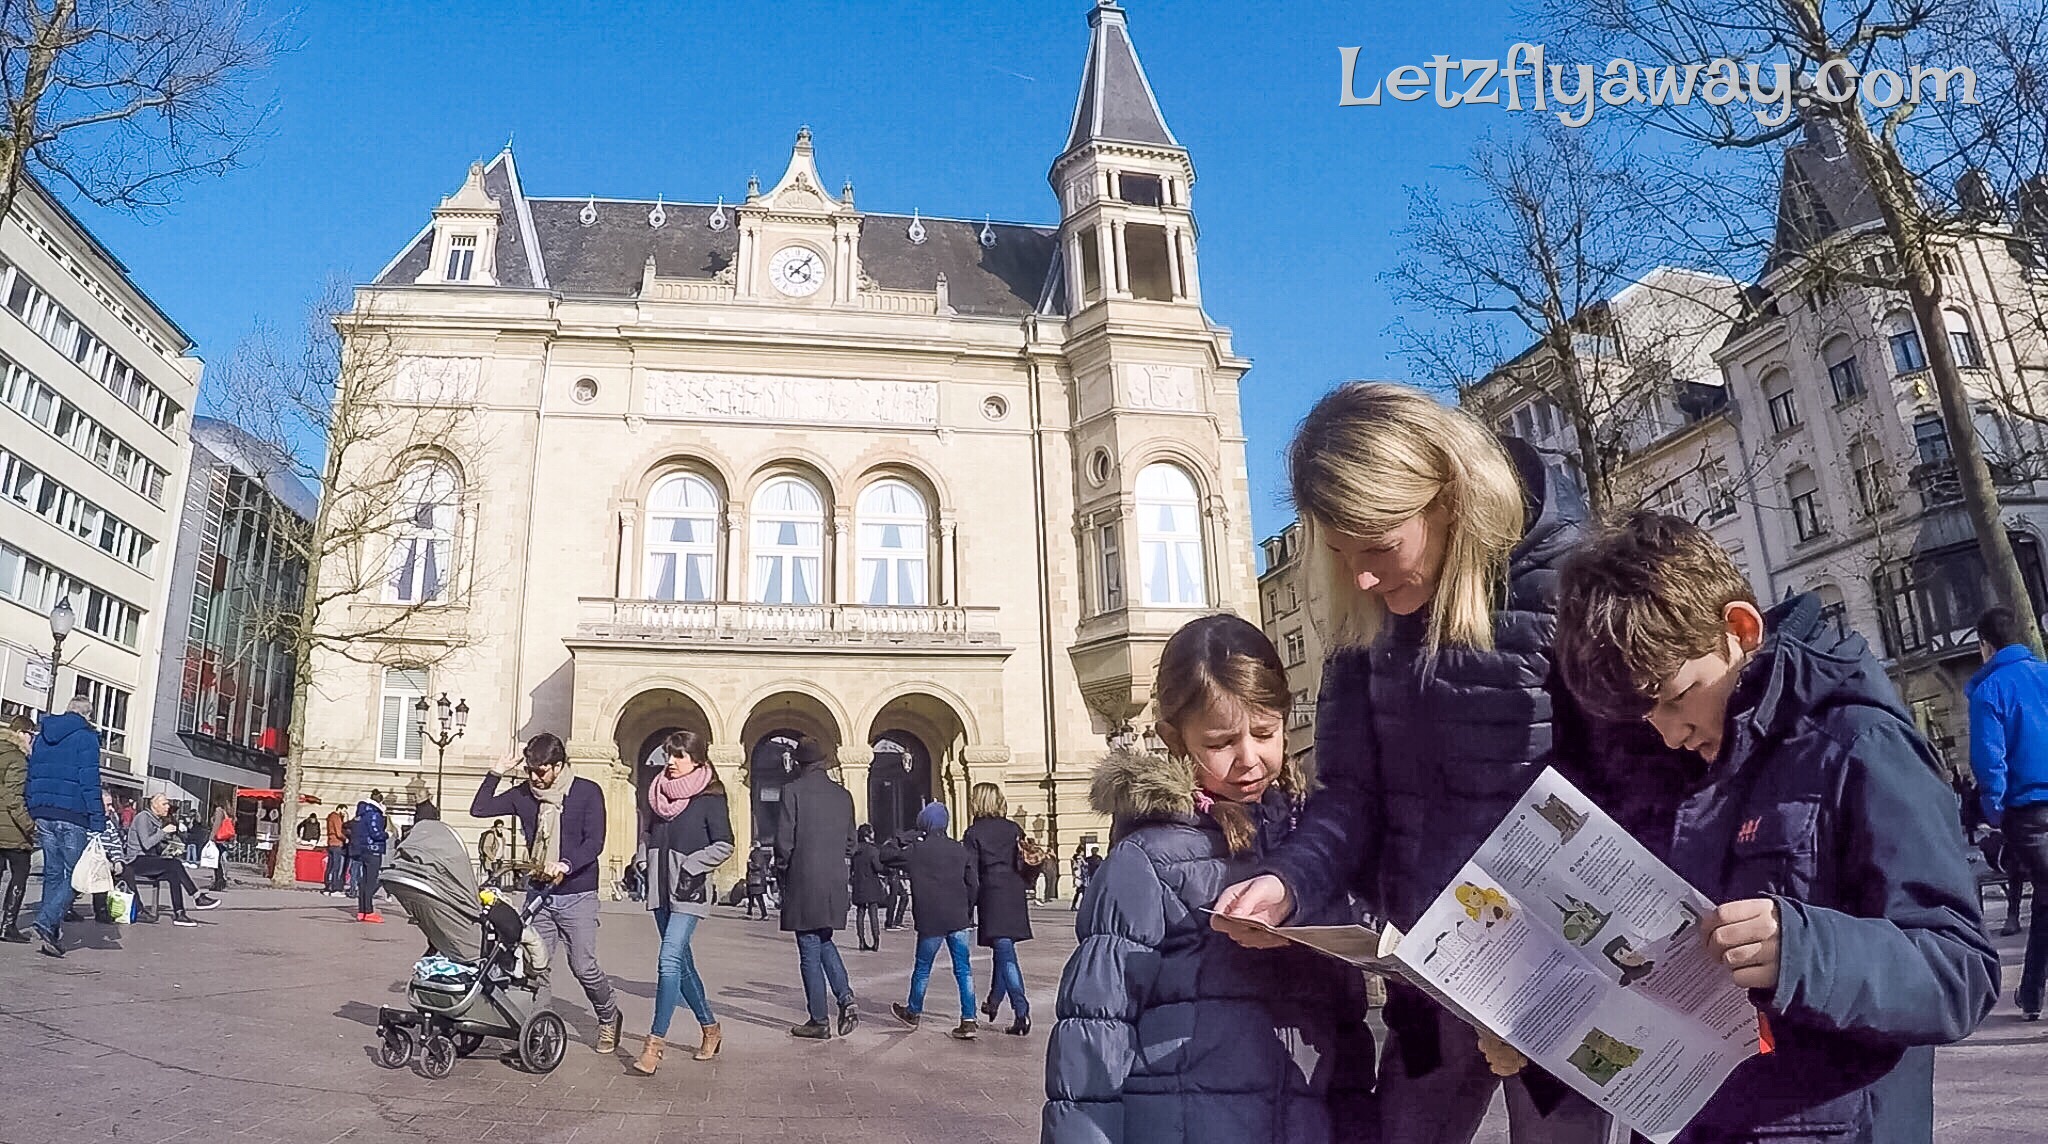 Luxembourg City Promenade for Kids